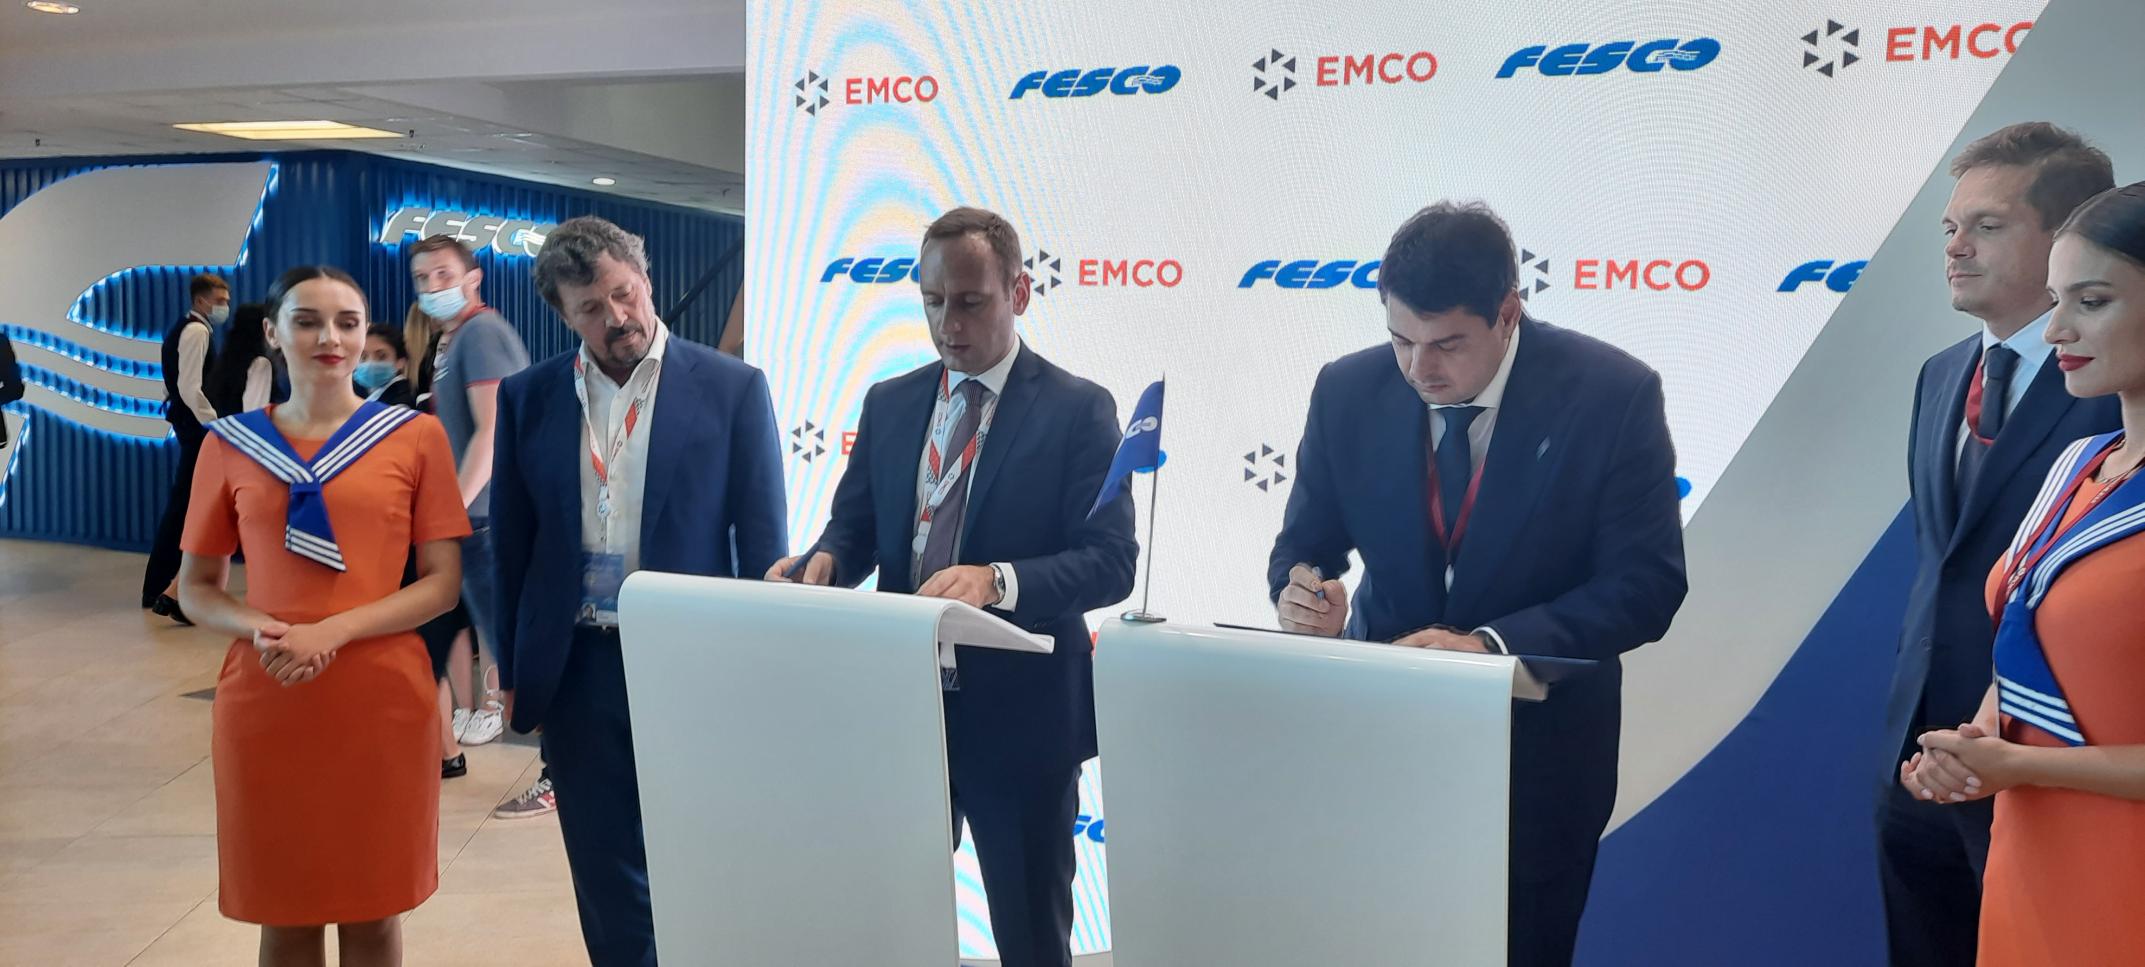 FESCO and EMCO Ltd. are to cooperate in transportation of heavy and oversized cargo from China and Europe to Sakhalin